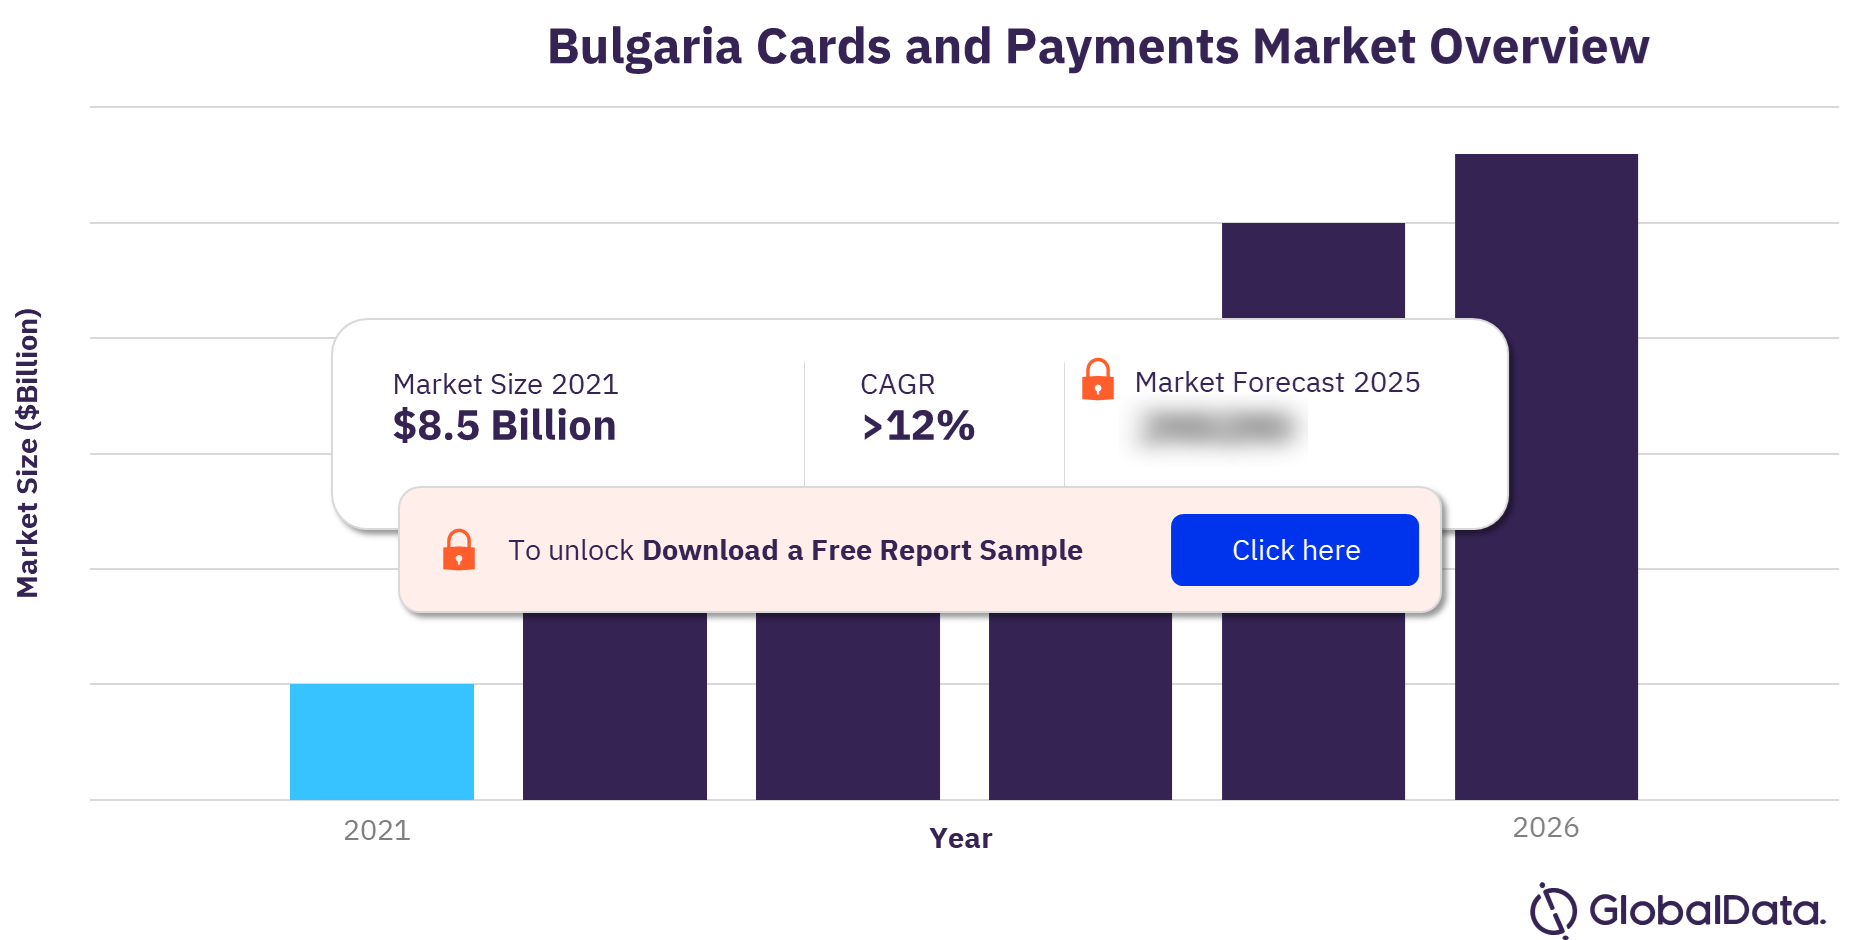  Bulgaria cards and payments market outlook